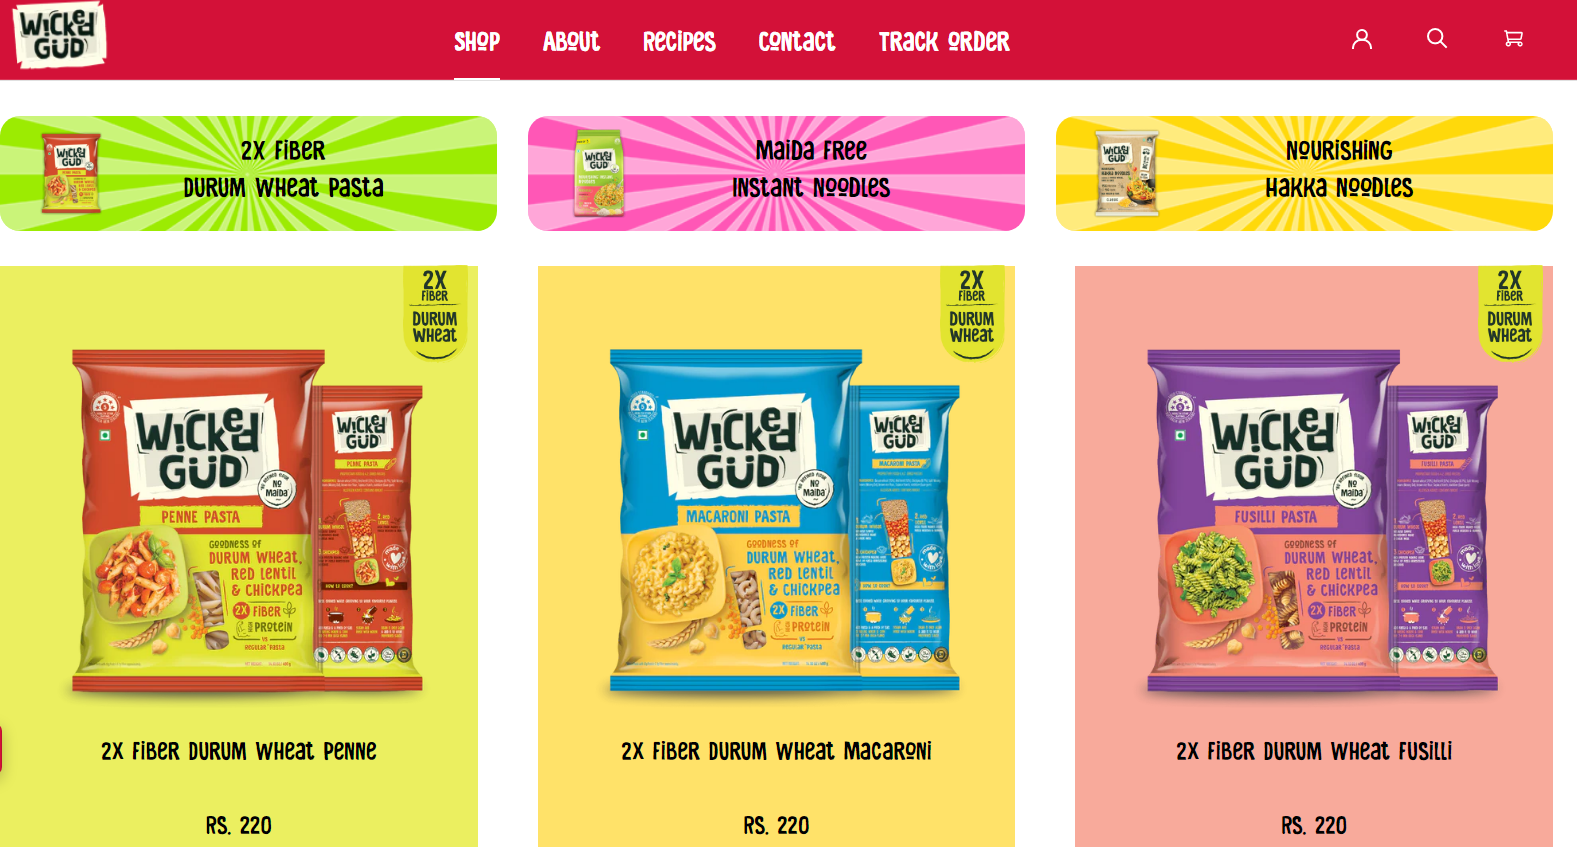 WickedGüd Raises $273,420 in Funding Round to Revolutionize the Food & Beverages Industry.